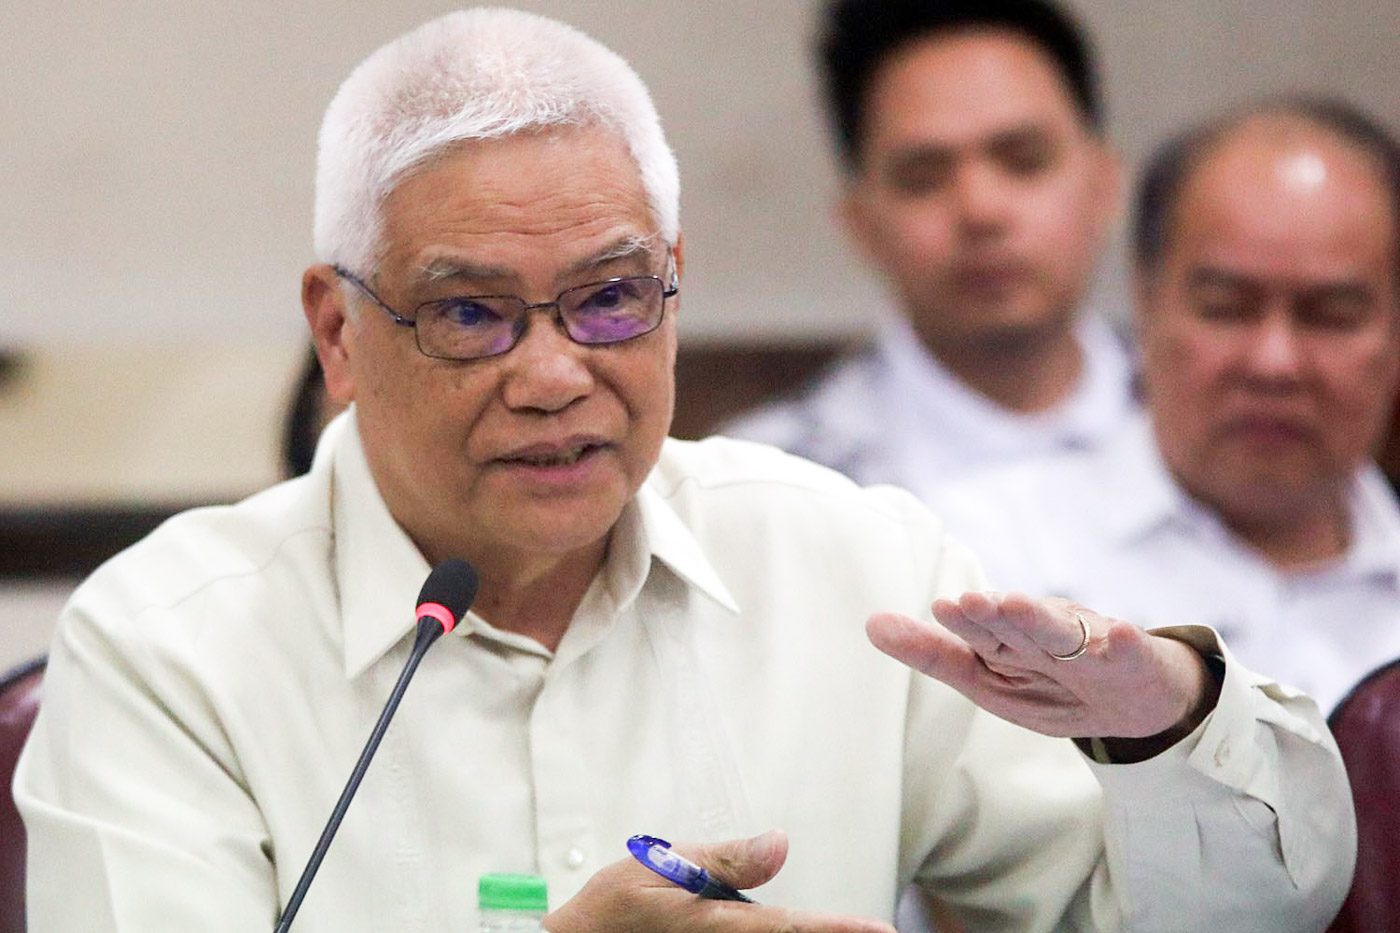 NOW Corp blames DICT’s Rio for drop in shares, eyes charges